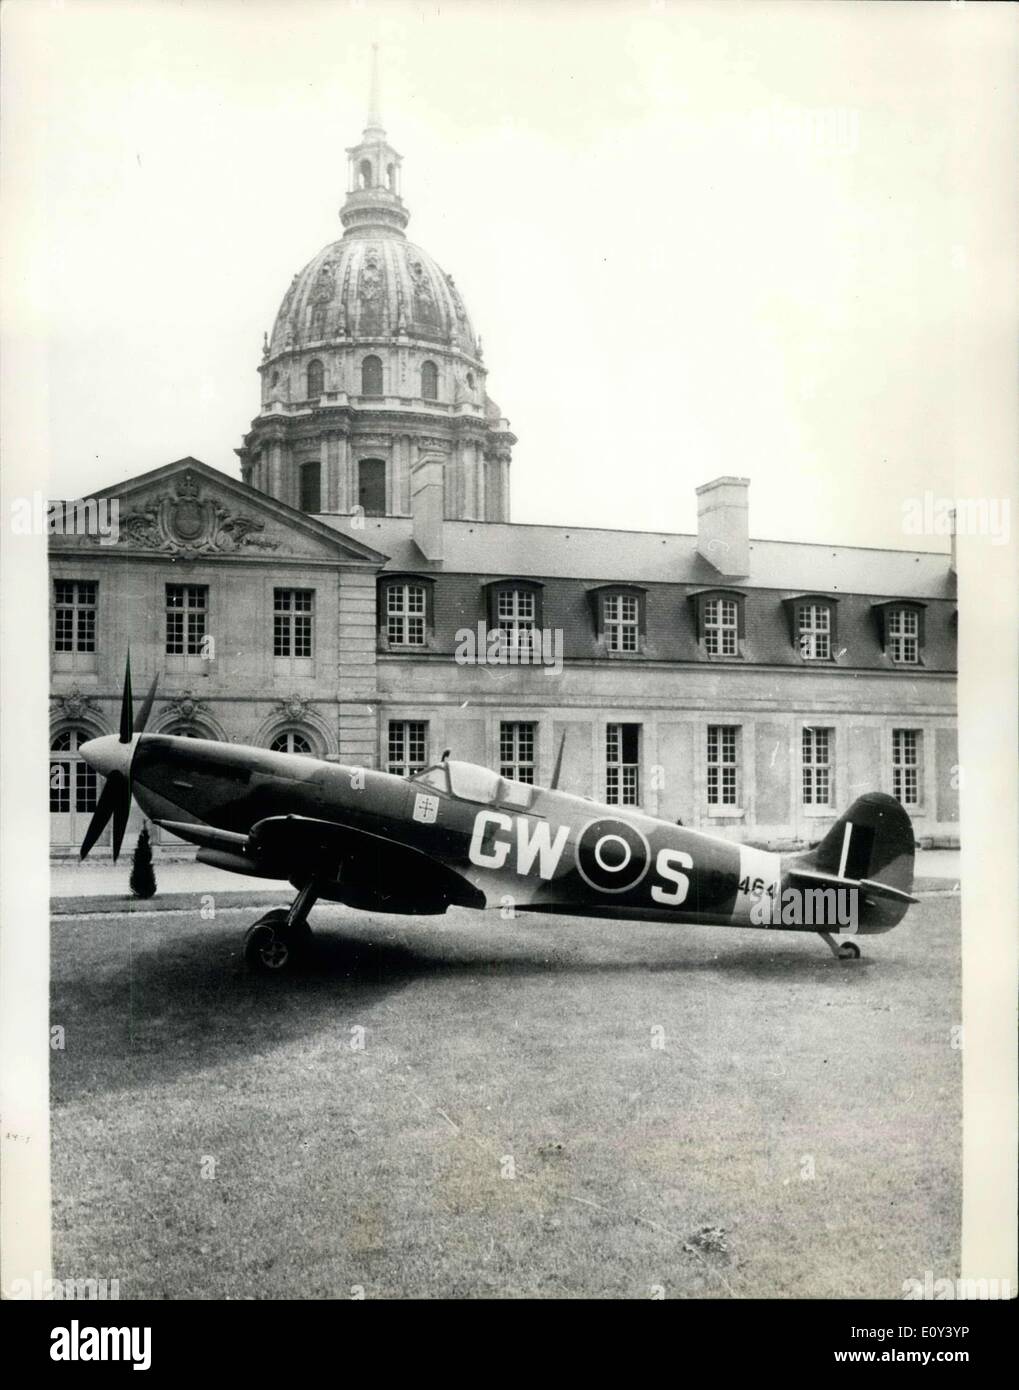 Oct. 10, 1968 - A Spitfire at the Invalides in Paris.: The Hotel des Invalides in Paris, already has many relics of Free France, and recently they acquired a new souvenir - a Spitfire with the Cross of Lorraine. Photo shows the spitfire bearing the Cross of Lorraine, pictured at the Hotel des Invalides, Paris. Stock Photo